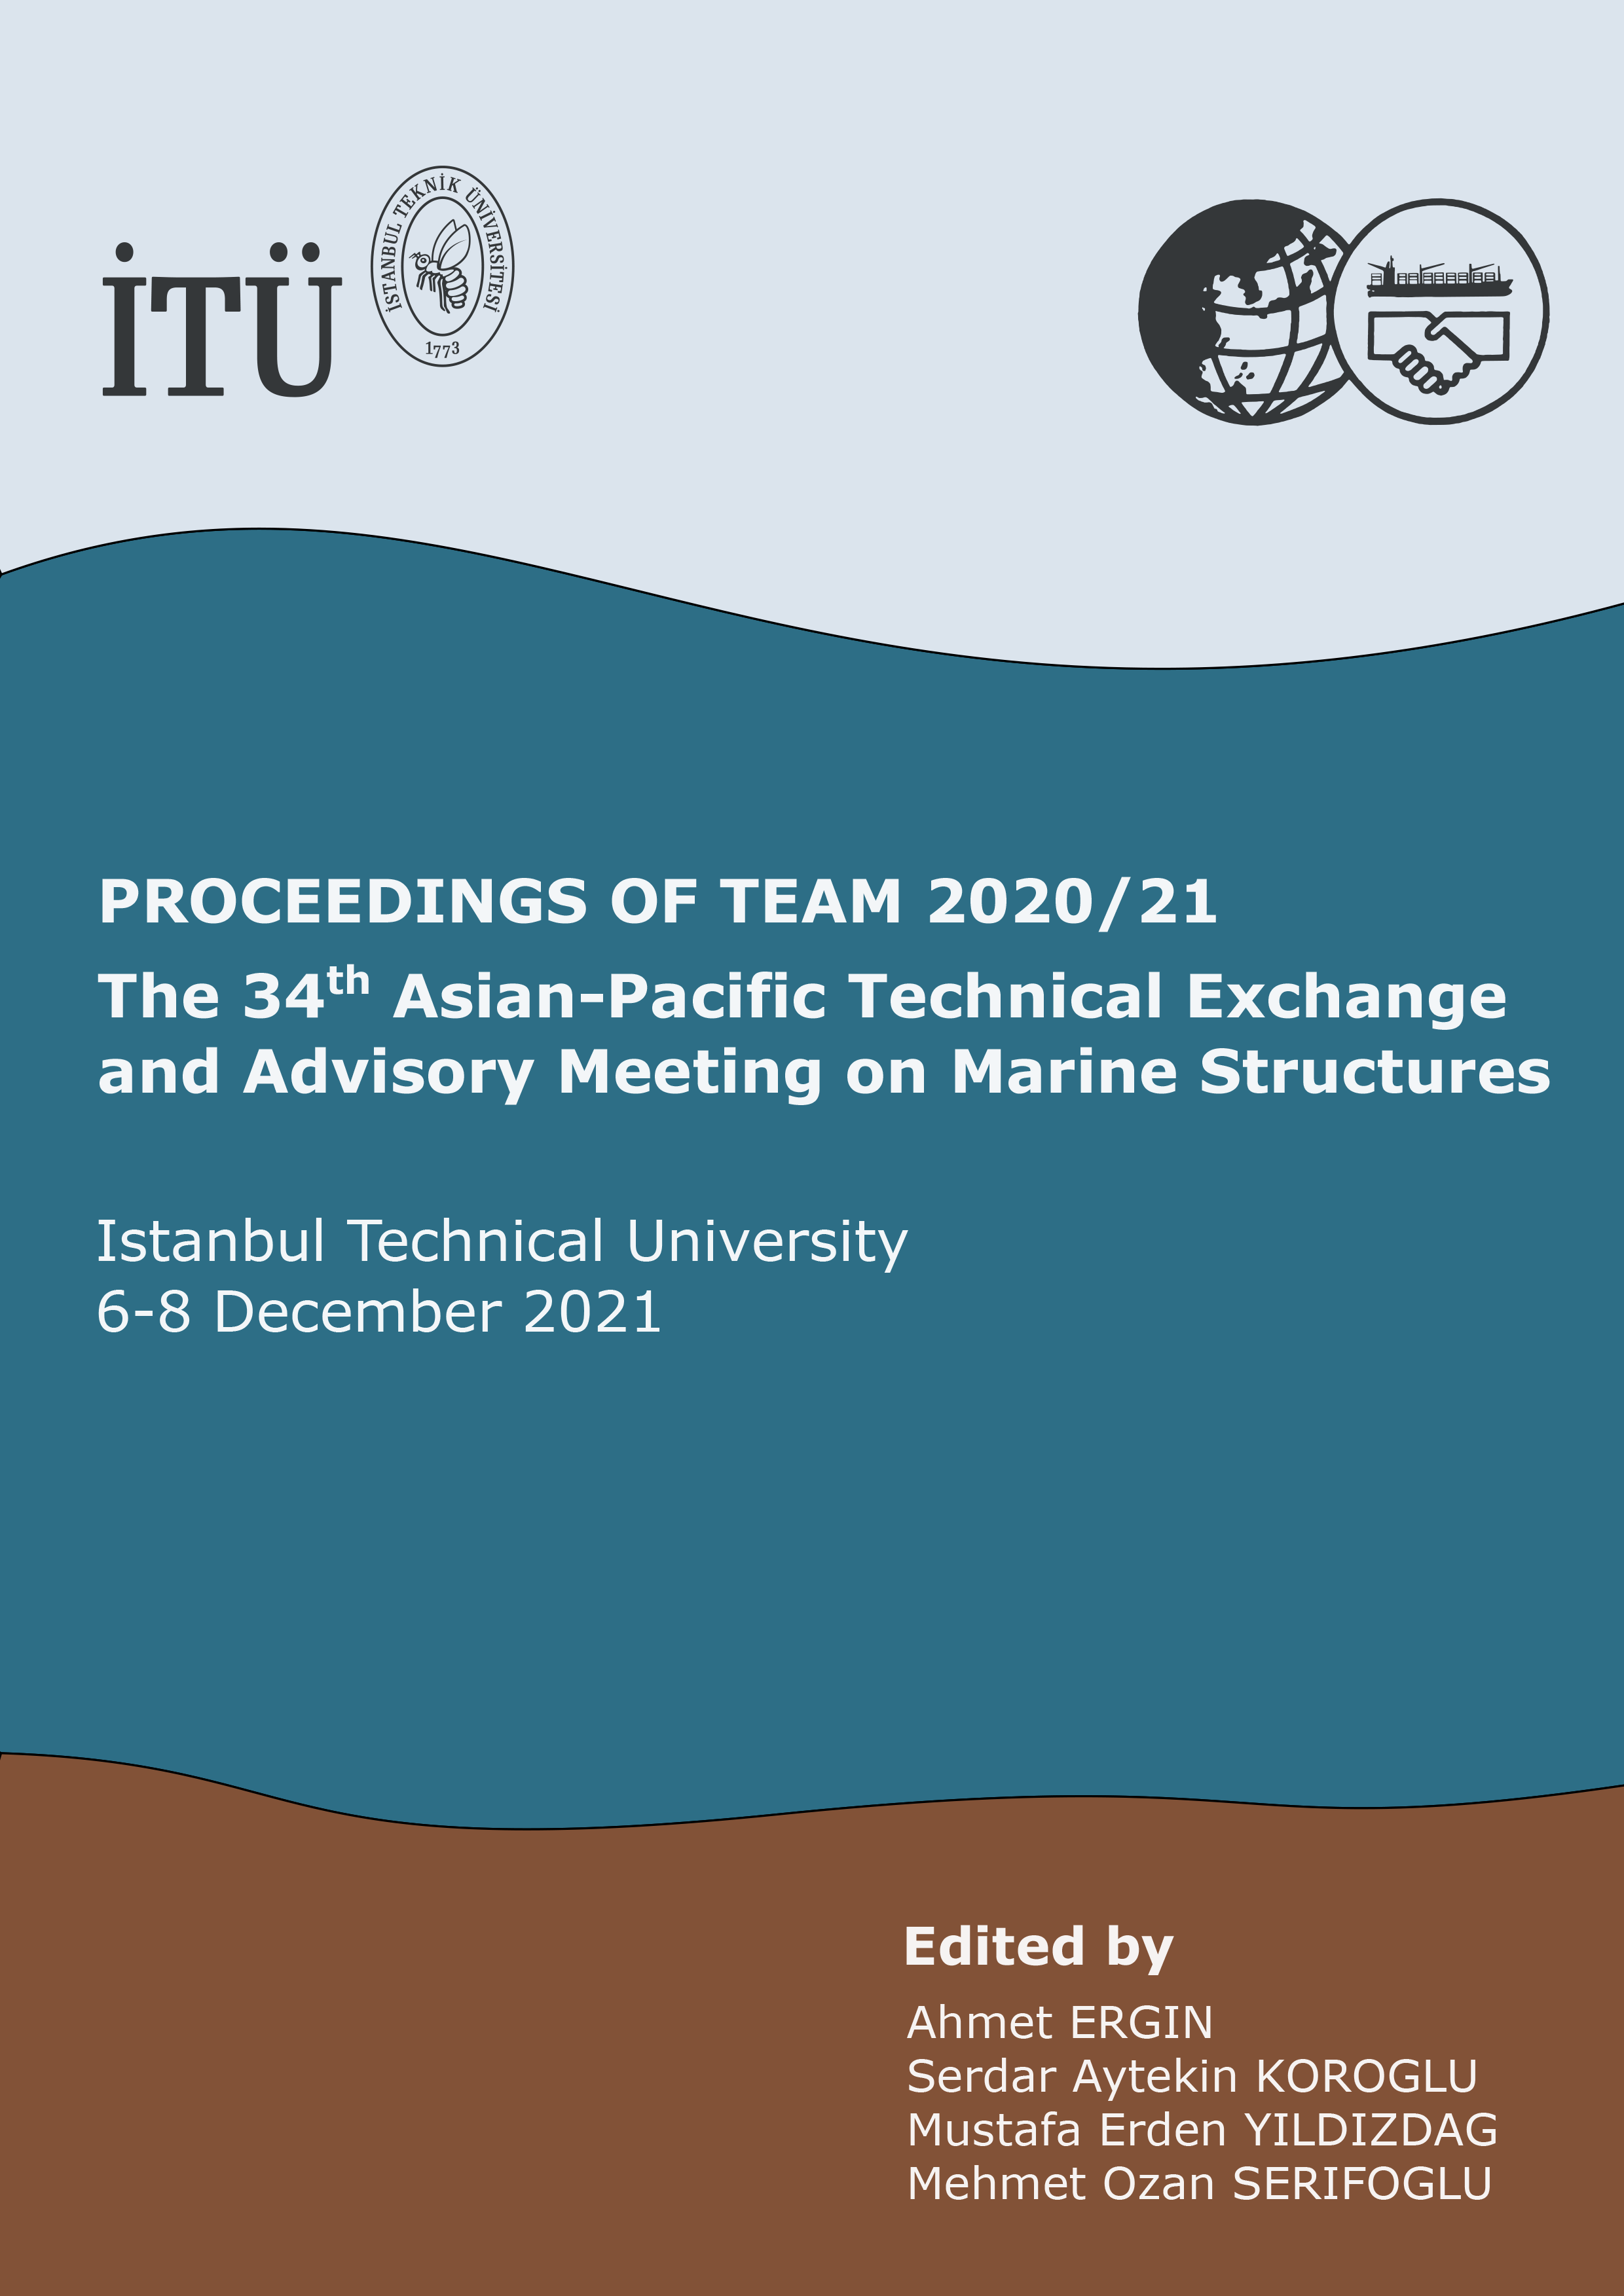 TEAM2020-21_Proceedings_cover_page